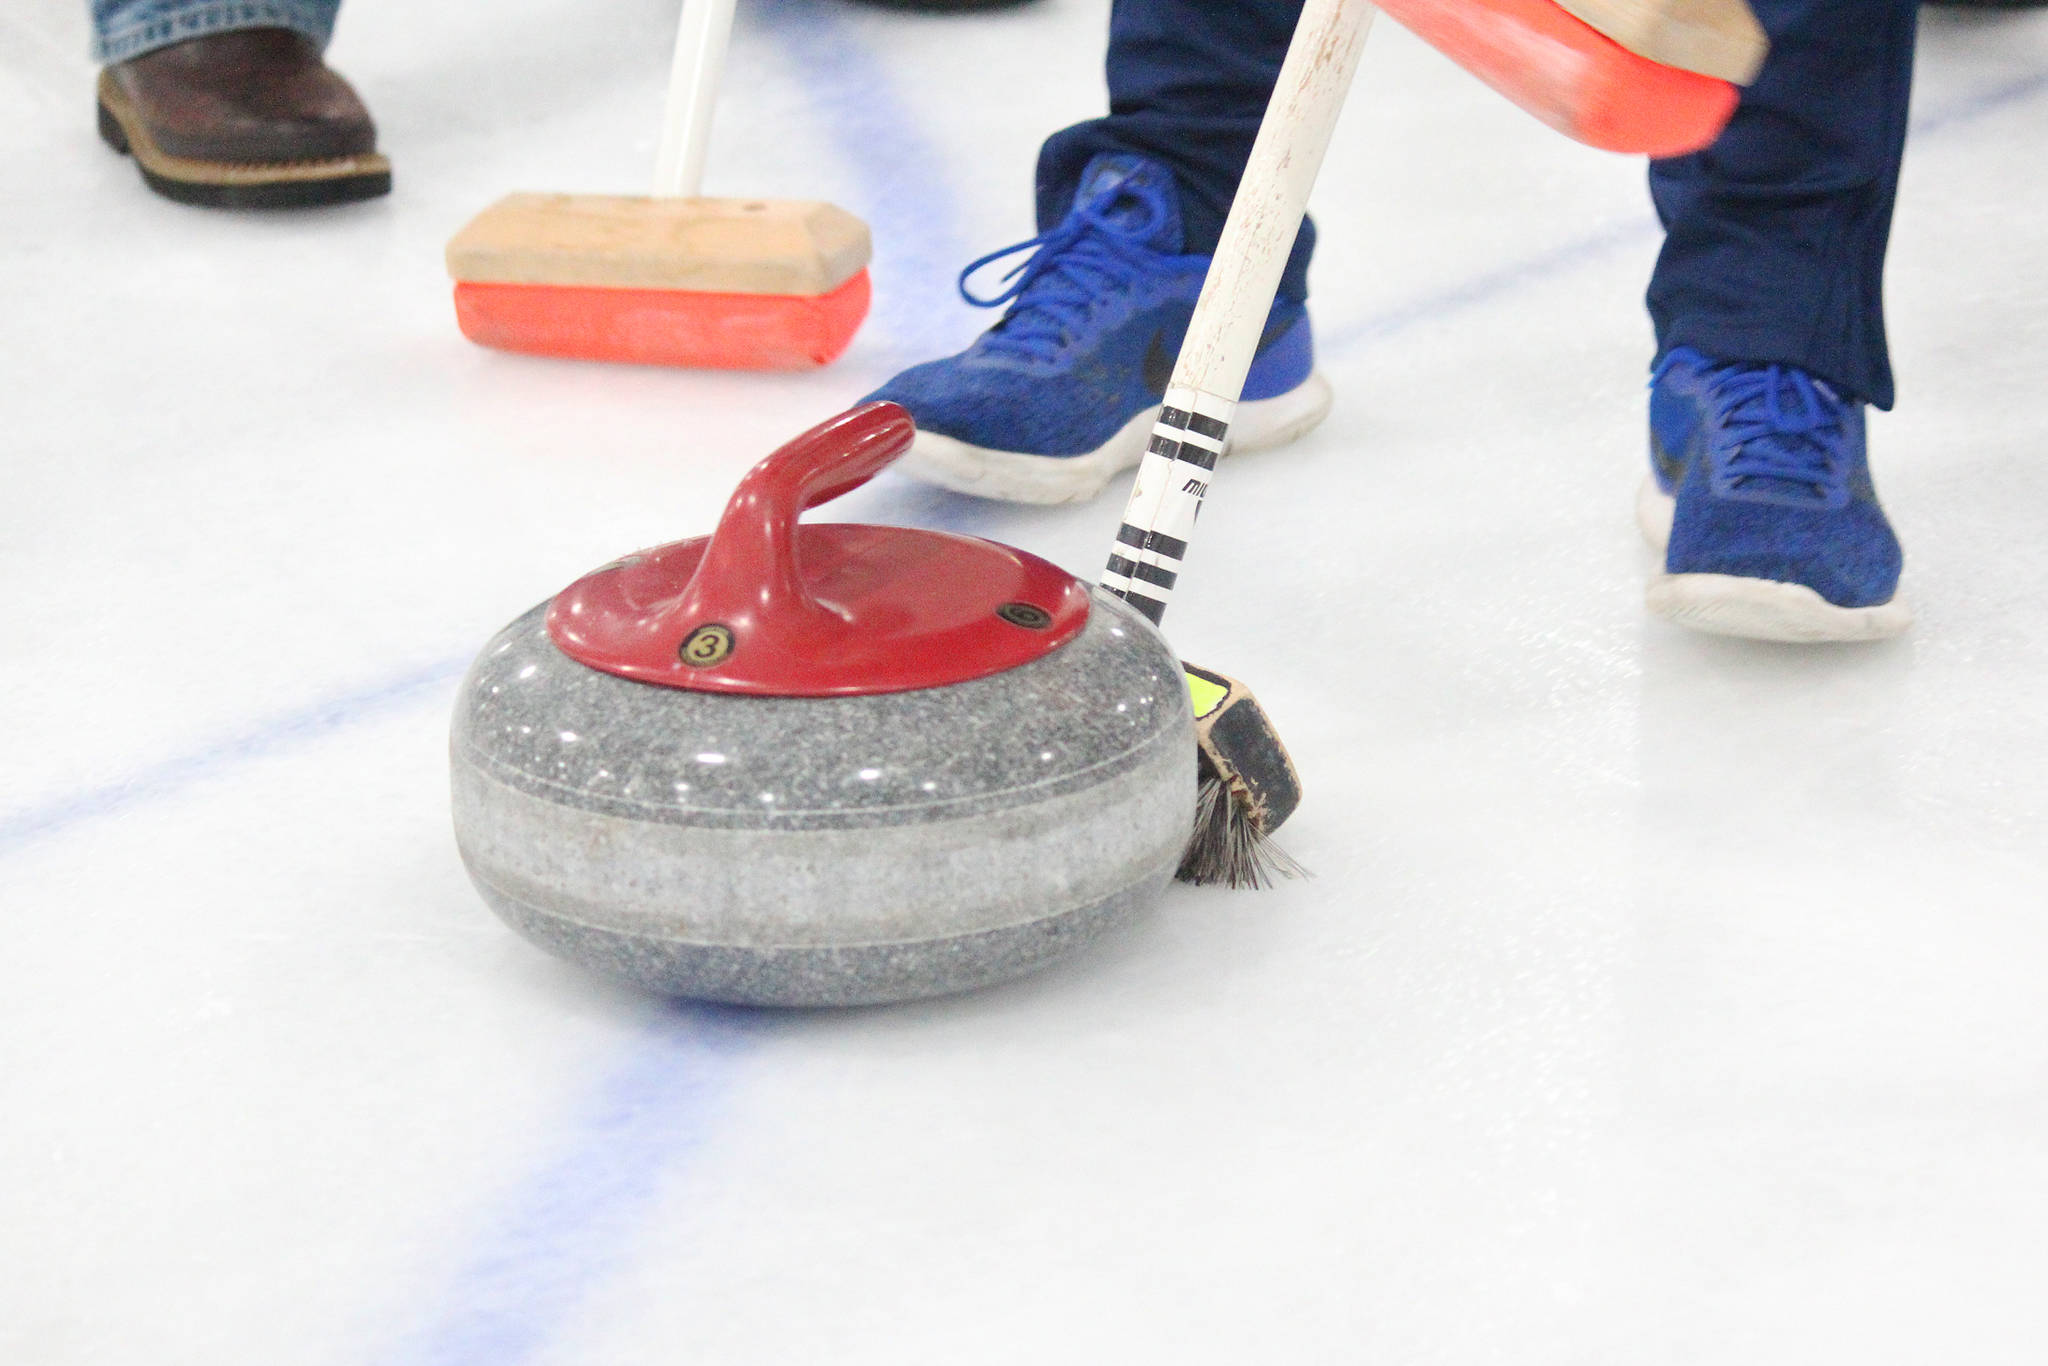 A curling stone is swept across the ice during a Learn to Curl clinic Saturday, Jan. 12, 2019 at Kevin Bell Ice Arena in Homer, Alaska. The clinic was a fundraiser for the Homer Curling Club. (Photo by Megan Pacer/Homer News)